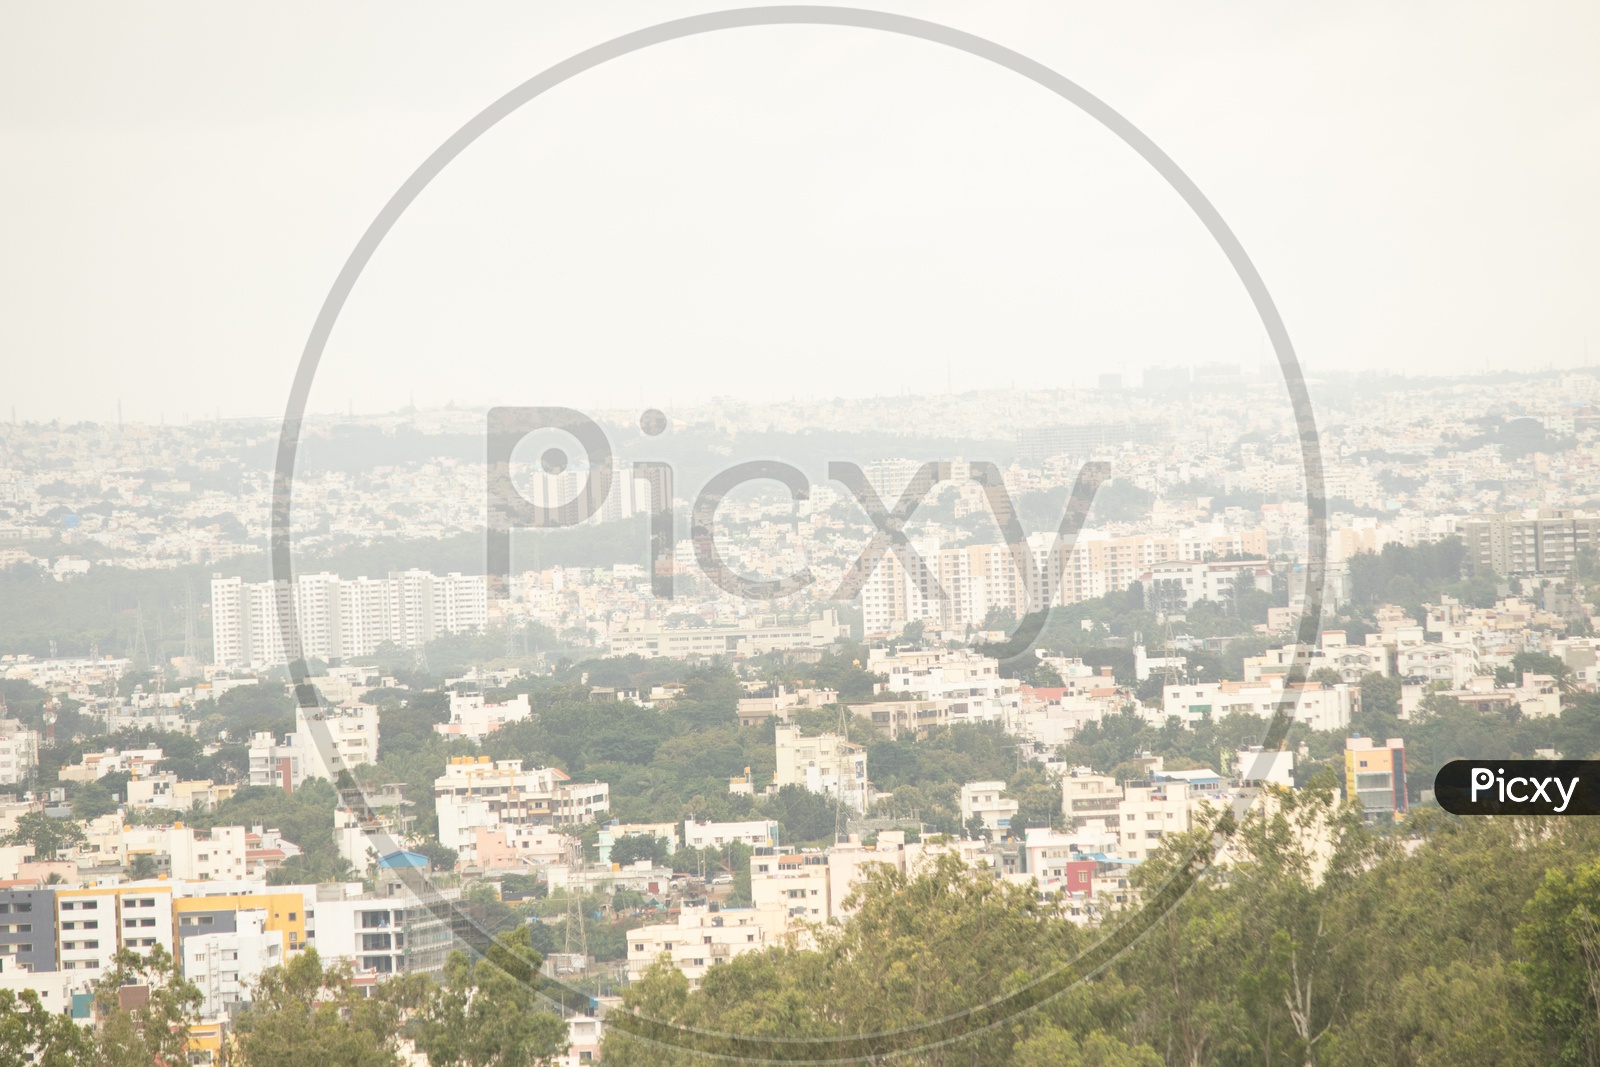 Turahalli City Scape View From Turahalli Reserve Forest